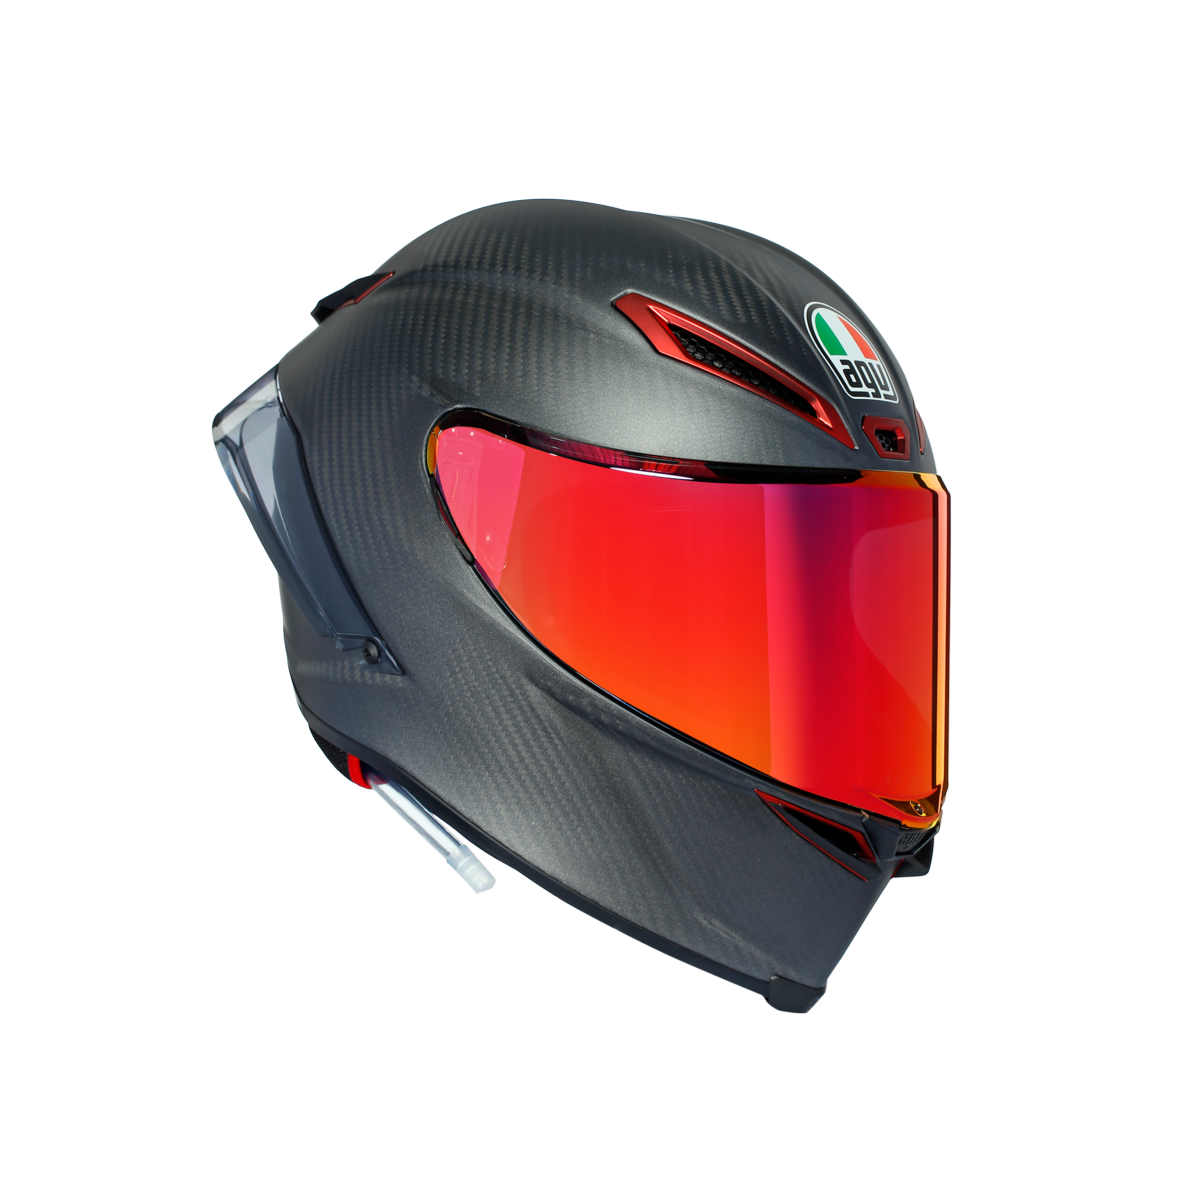 https://www.stylmachine.com/wp-content/uploads/2019/12/casque-agv-pista-gp-rr-speciale.png